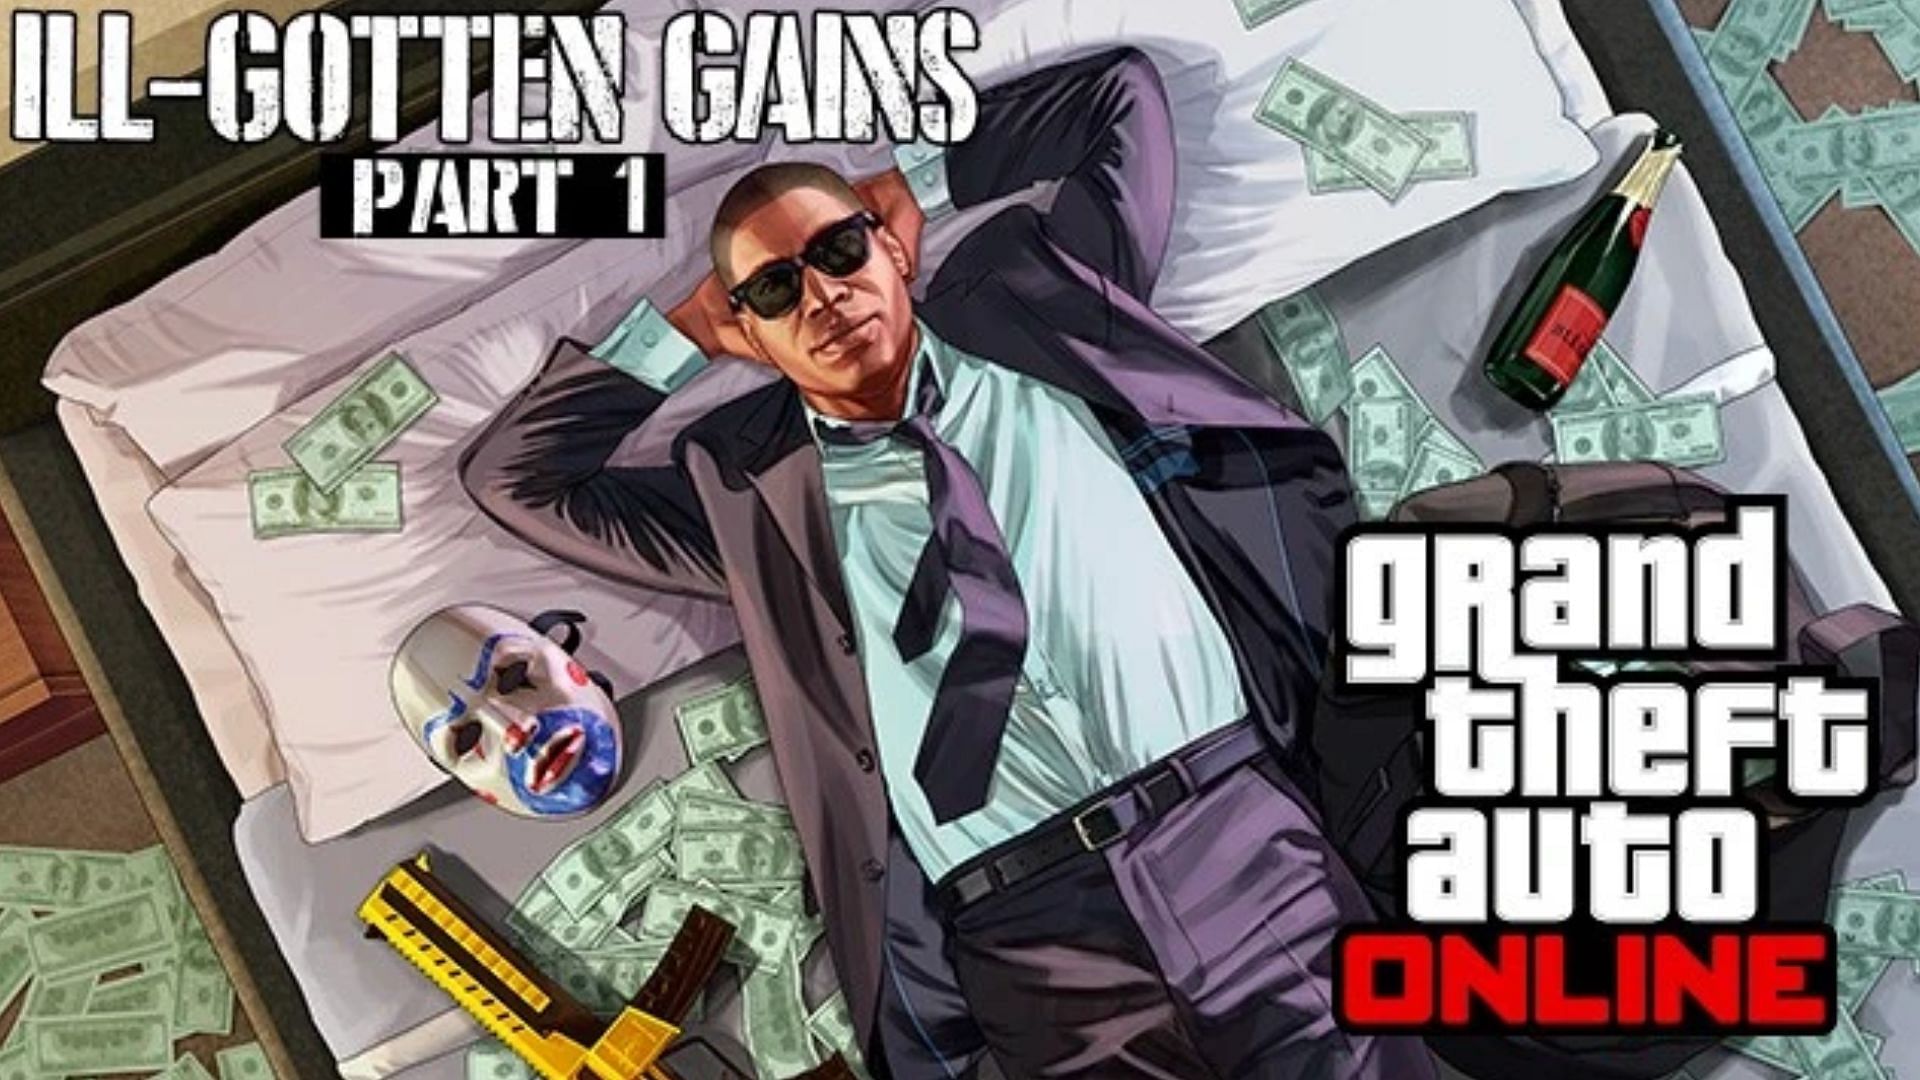 The official poster of the Ill-Gotten Gains - Part 1 DLC (Image via Rockstar Games)